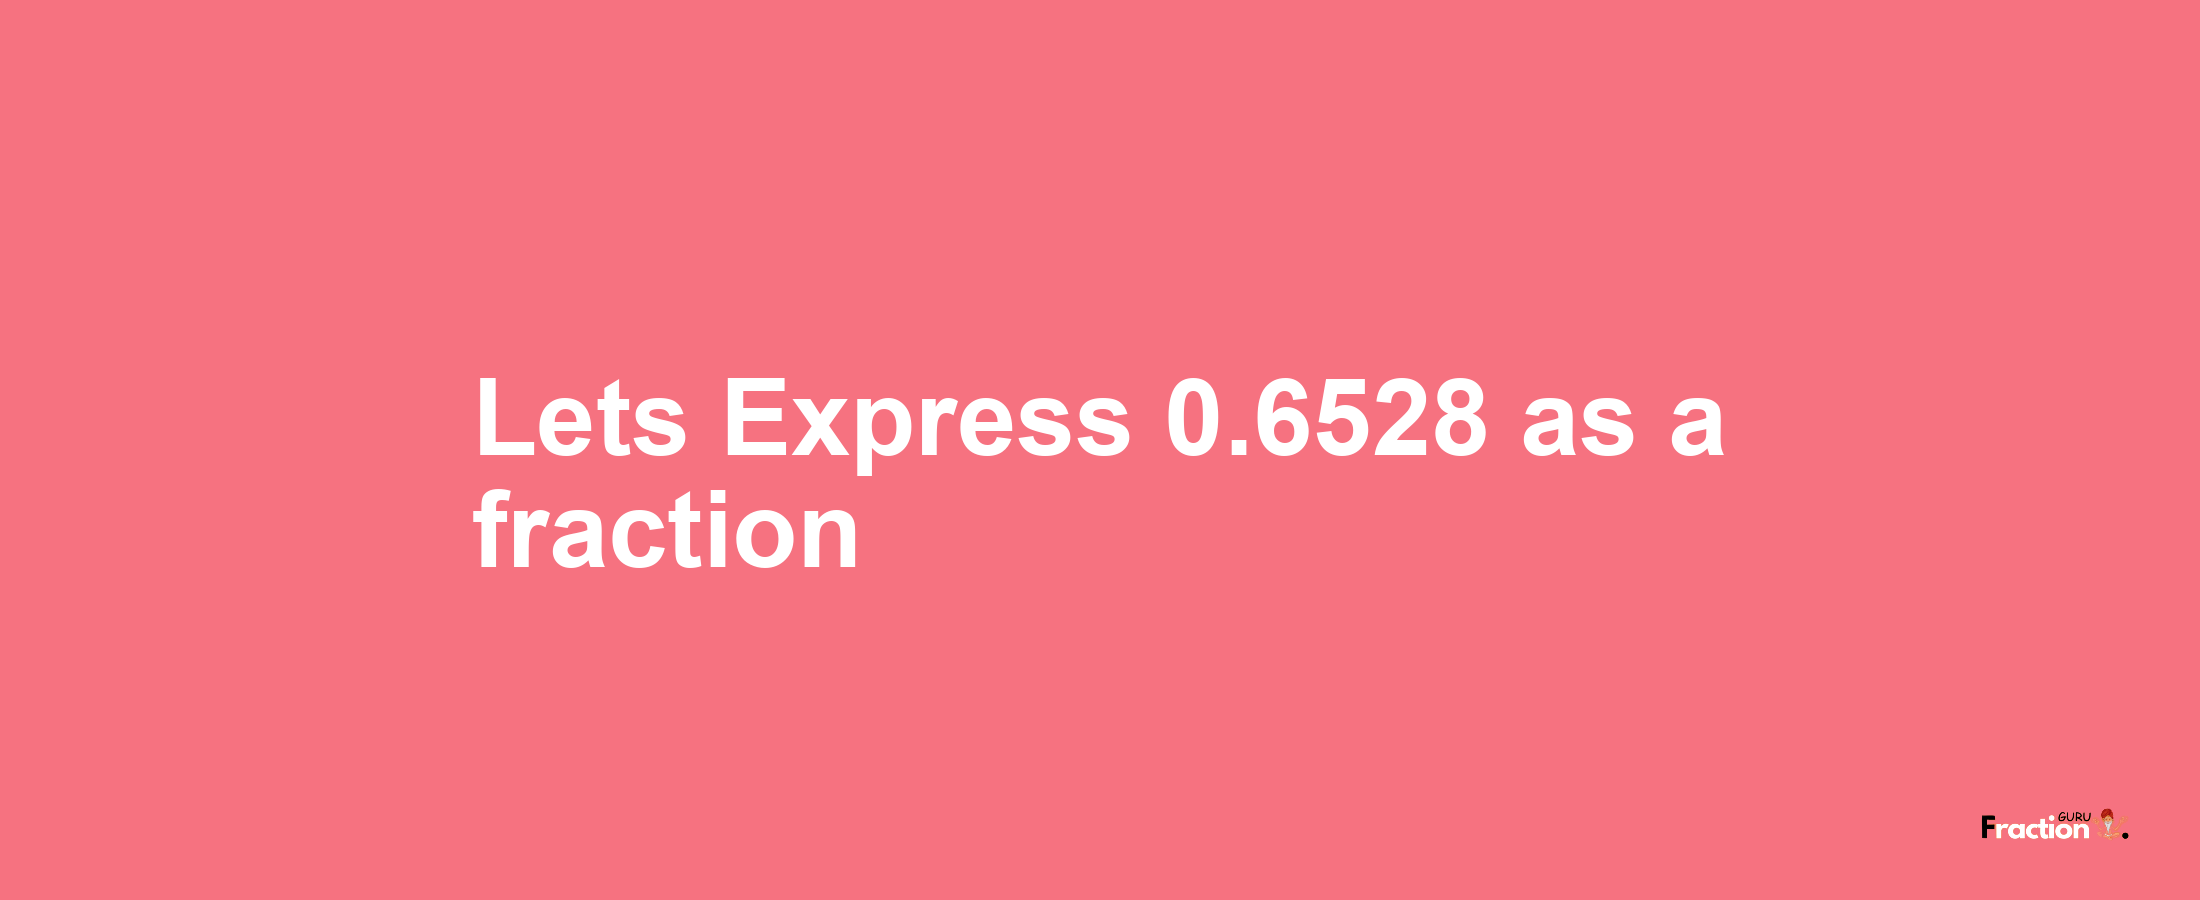 Lets Express 0.6528 as afraction